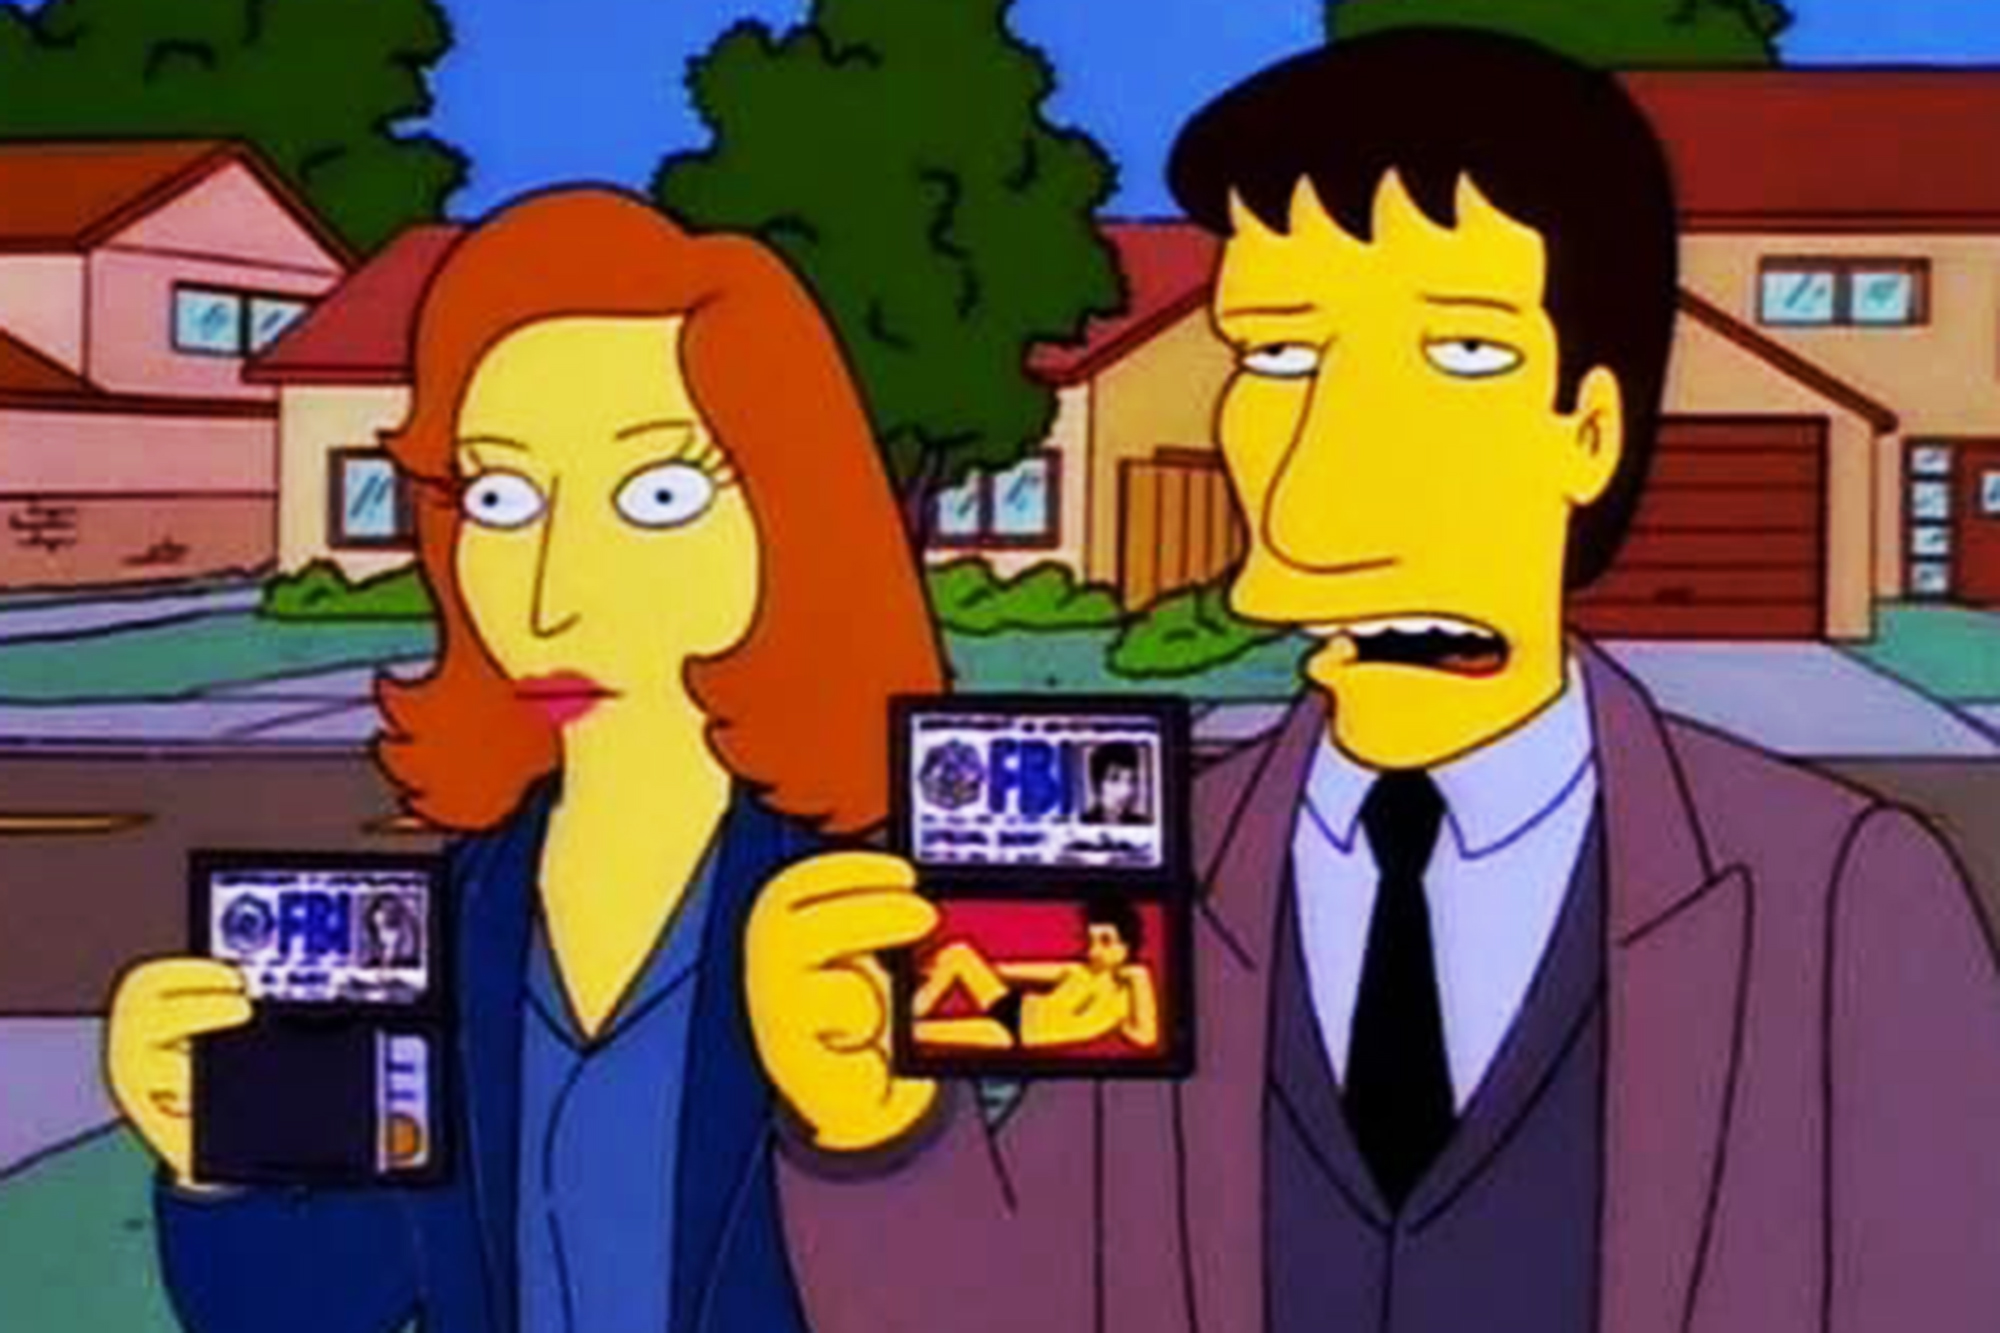 Gillian Anderson &amp; David Duchovny: Gillian Anderson and David Duchovny voiced their X-Files alter egos, Scully and Mulder, in  The Springfield Files,  which aired in 1997.